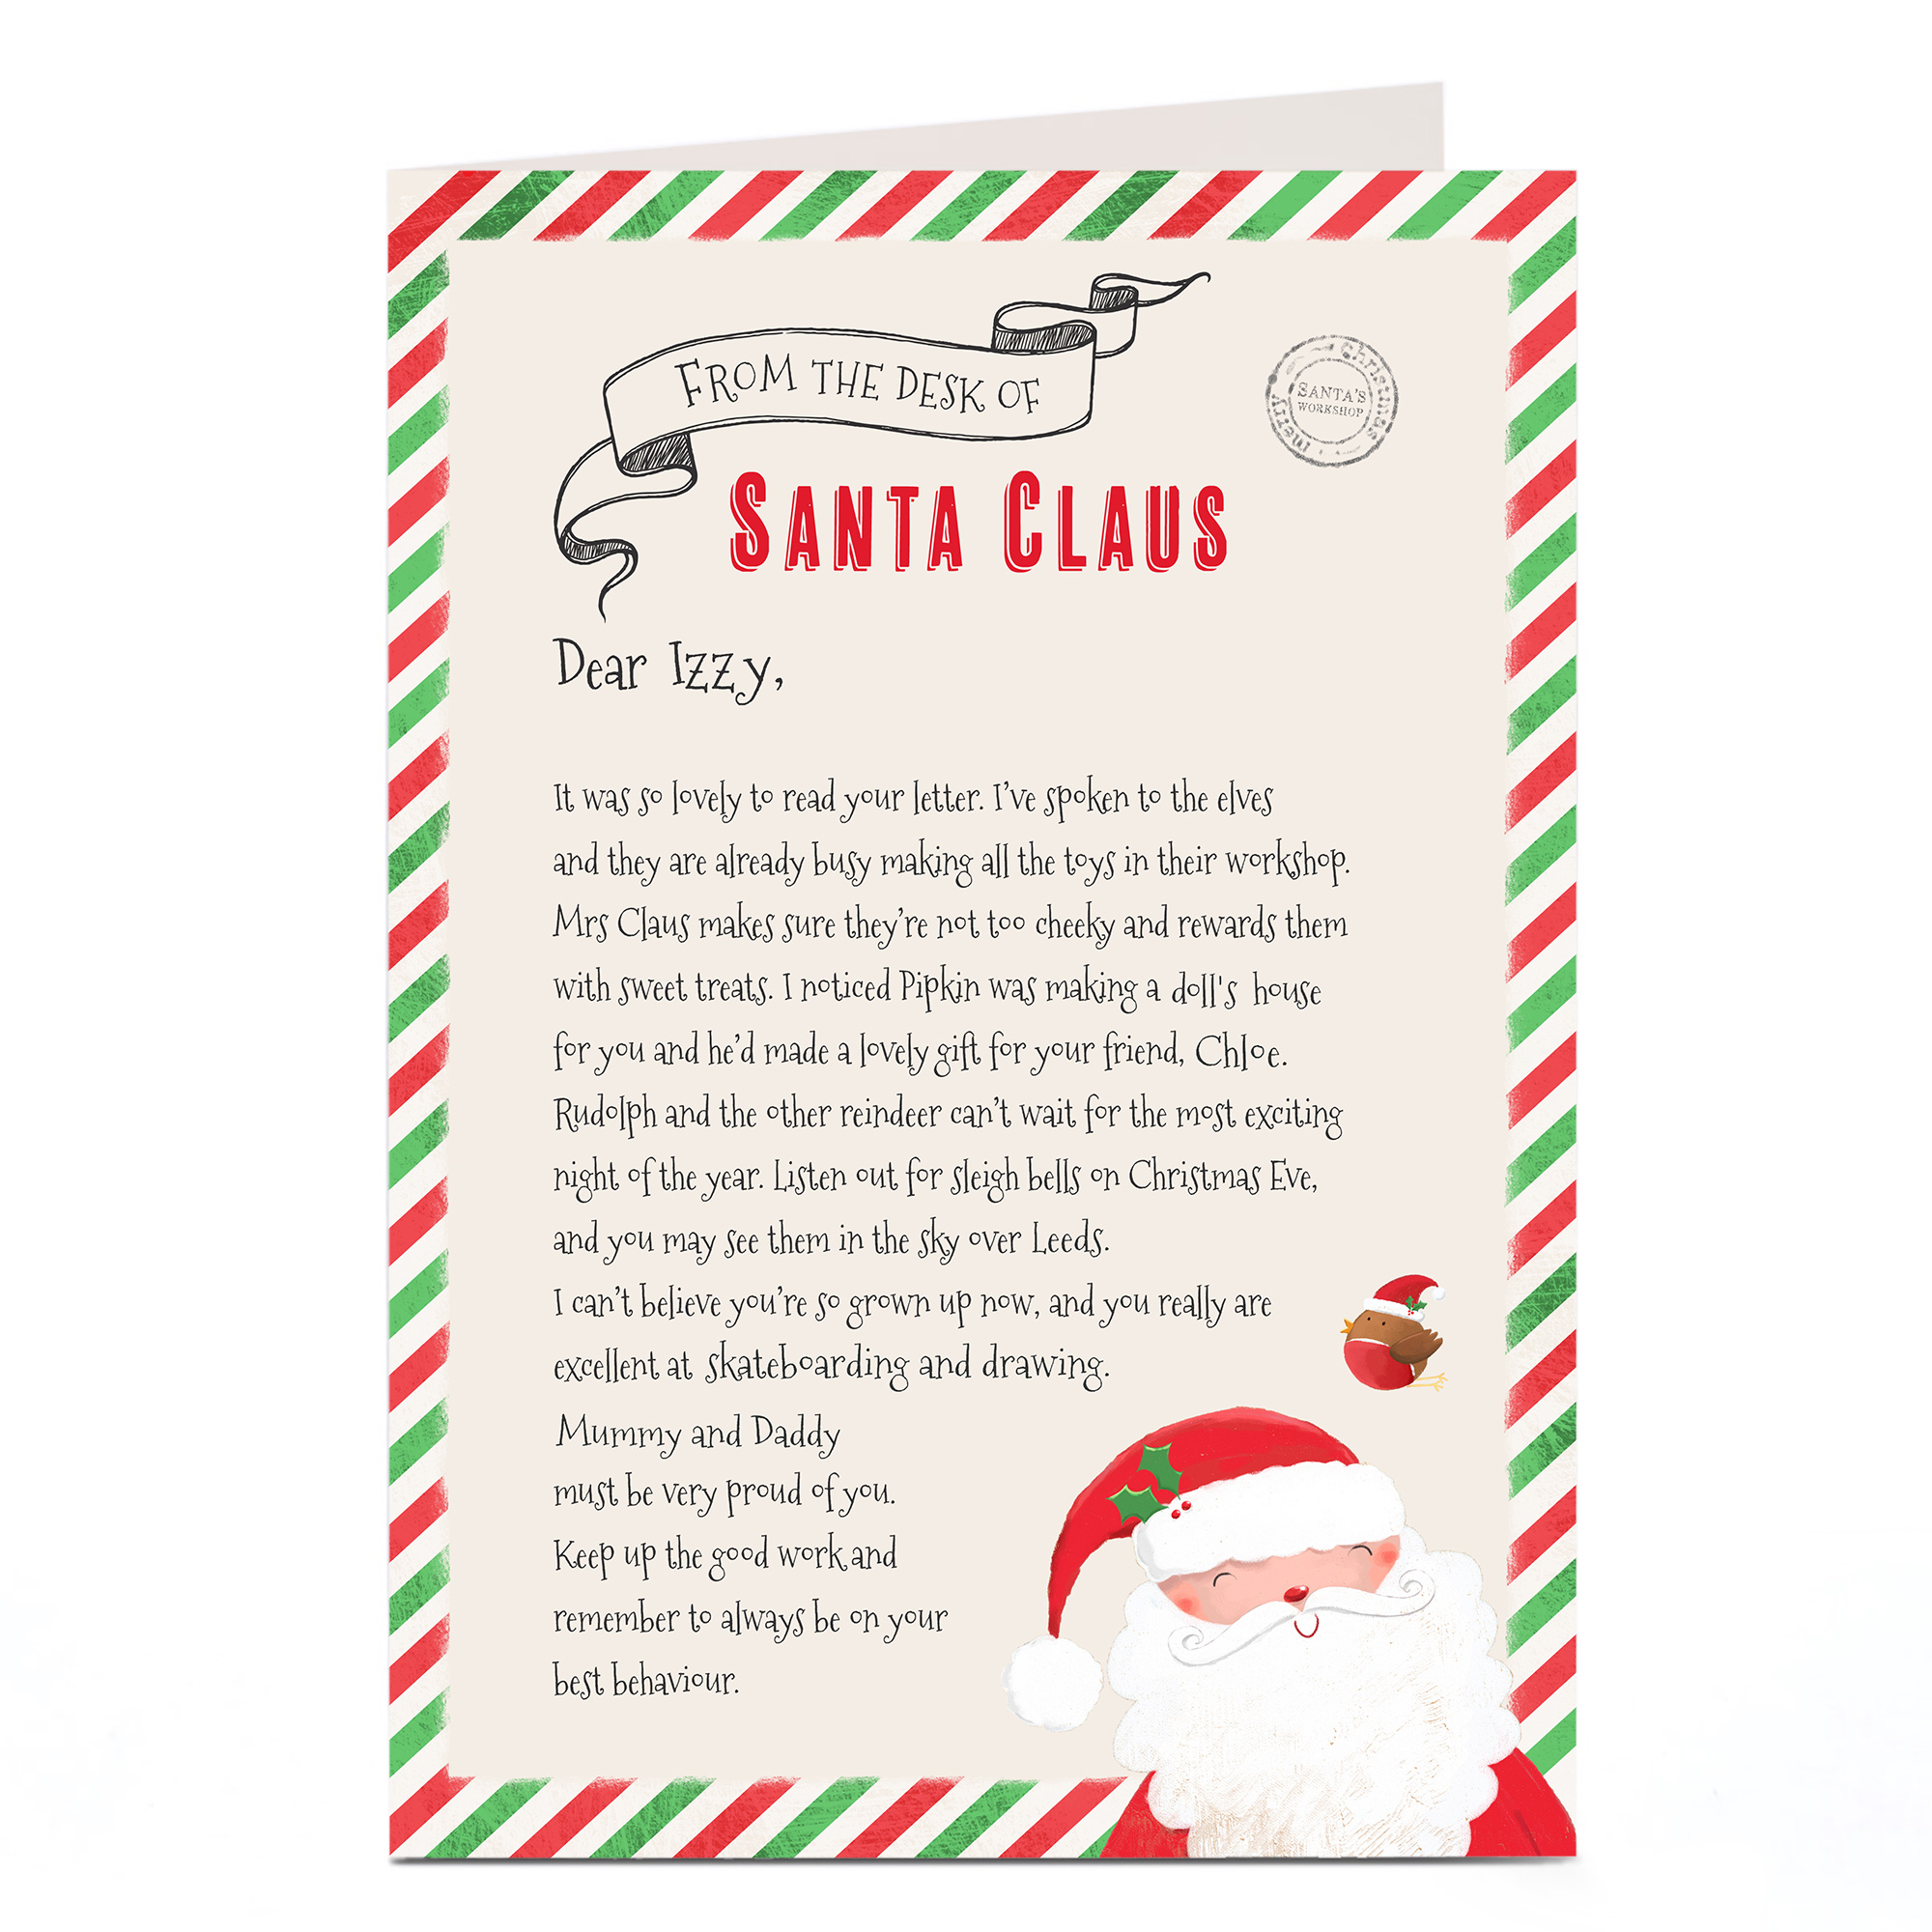 Personalised Letter From Santa - Desk of Santa Claus